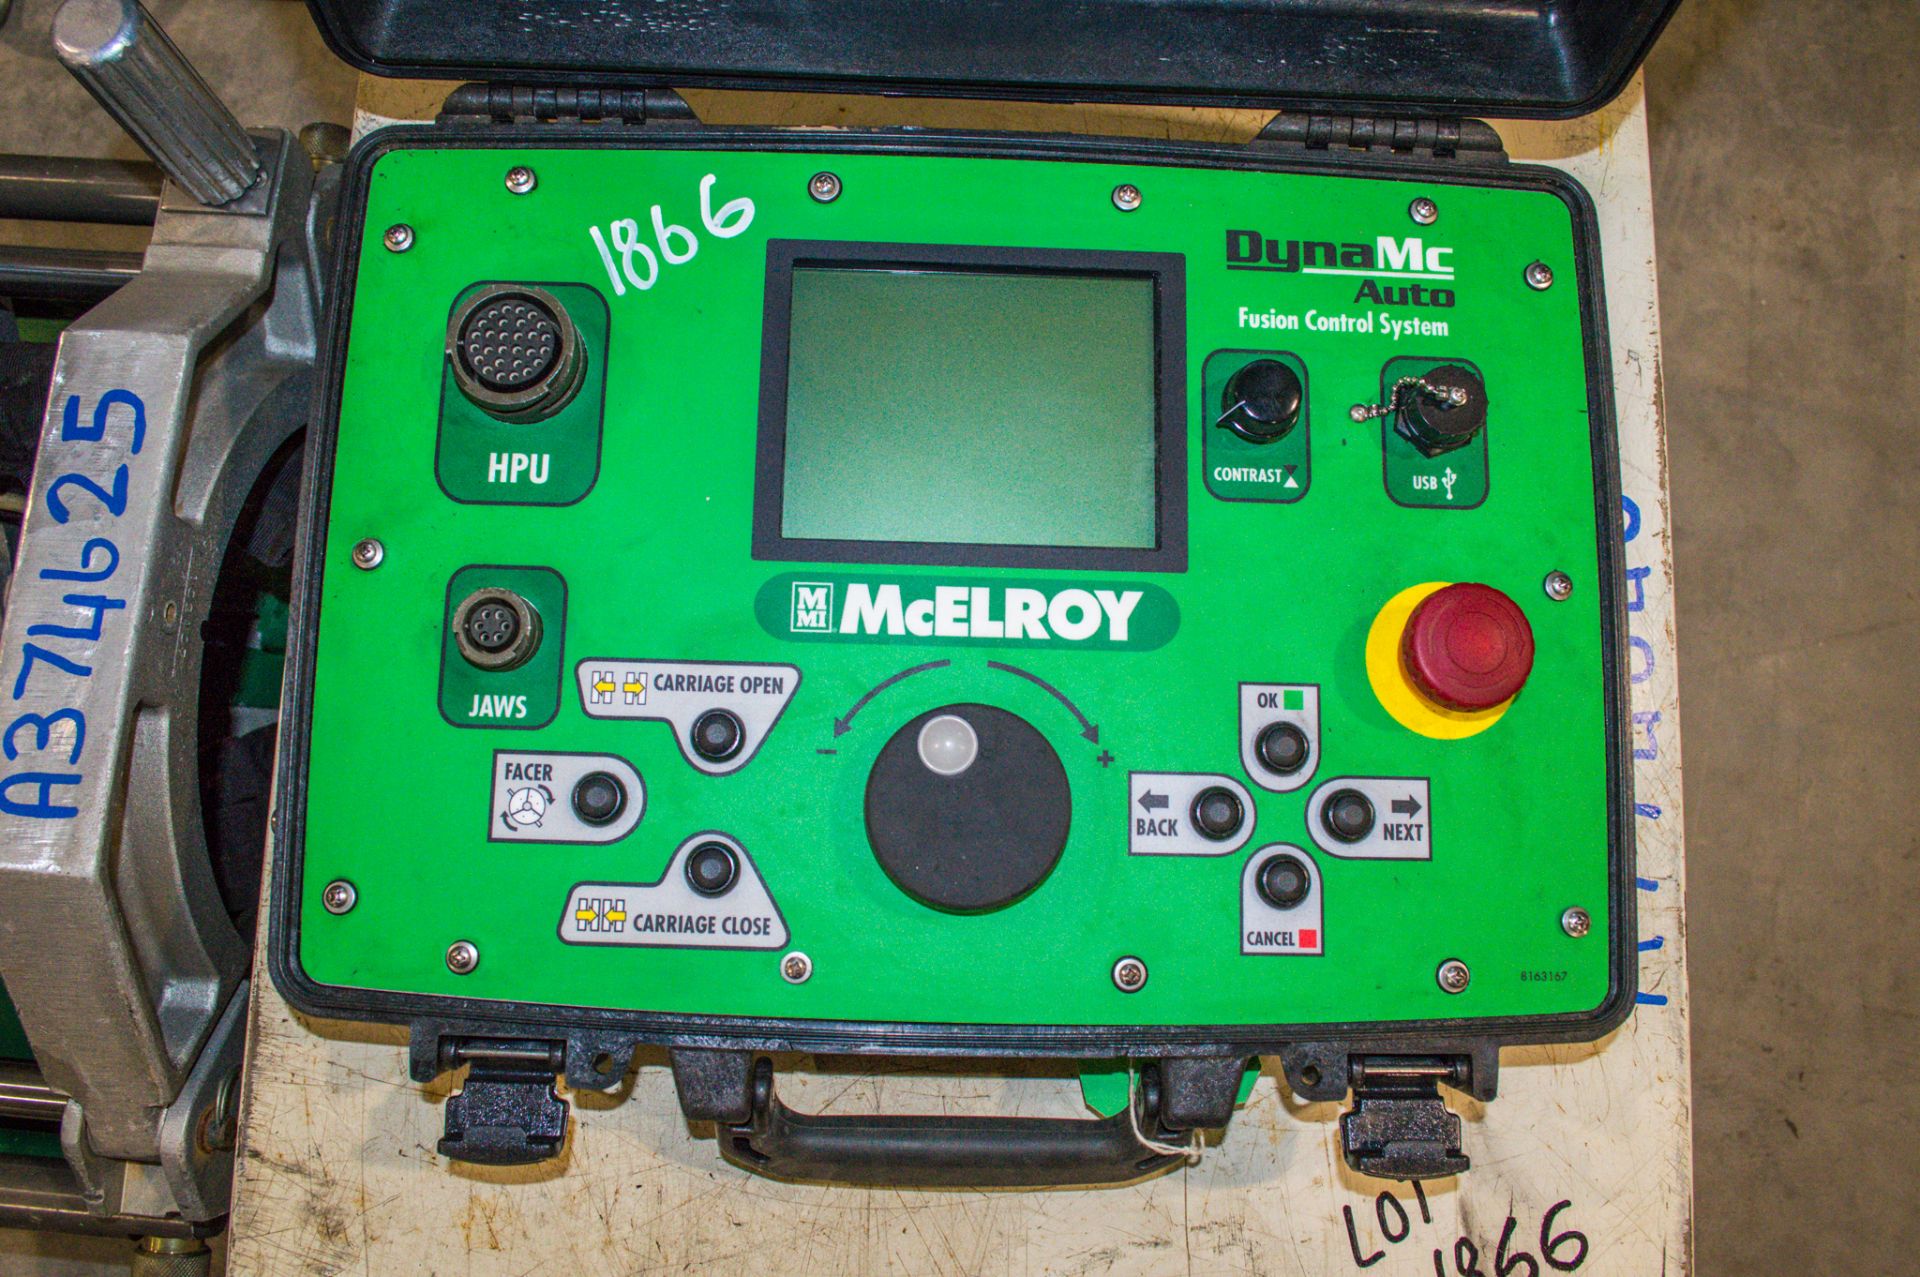 McElroy DynaMc butt fusion welding kit as photographed - Image 2 of 9